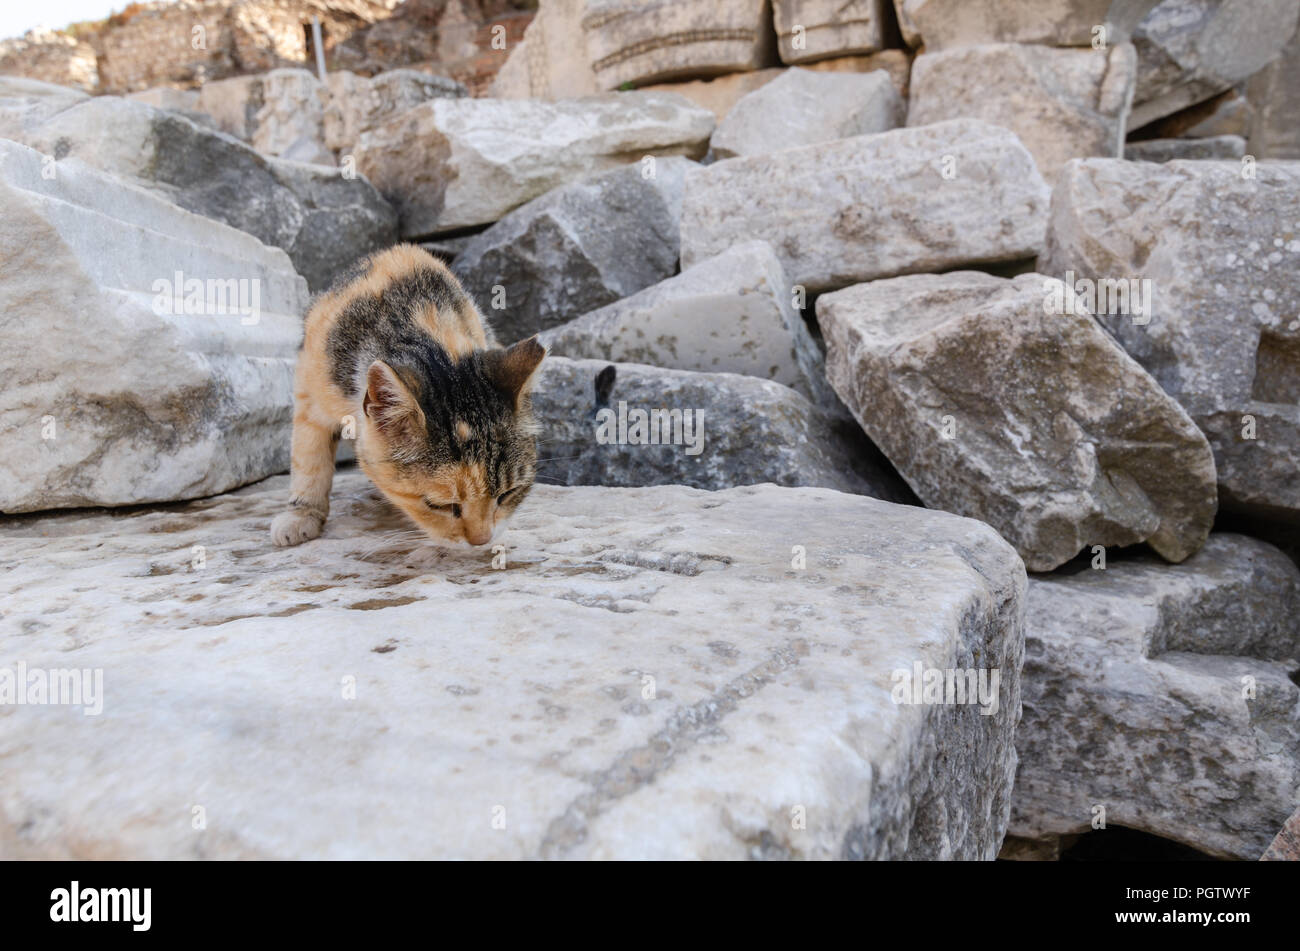 The cat is drinking water from the stones on old ruins in Ephesus Turkey Stock Photo